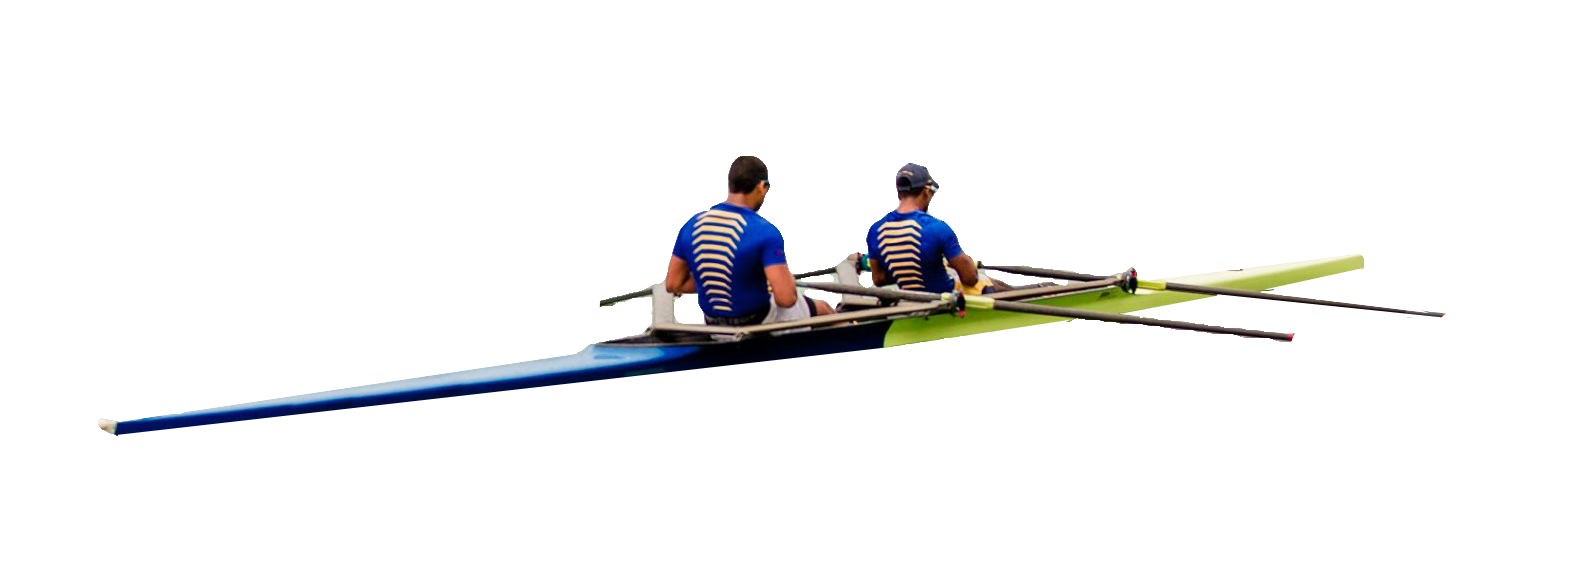 Royal rowers rowing in the Beira Lake